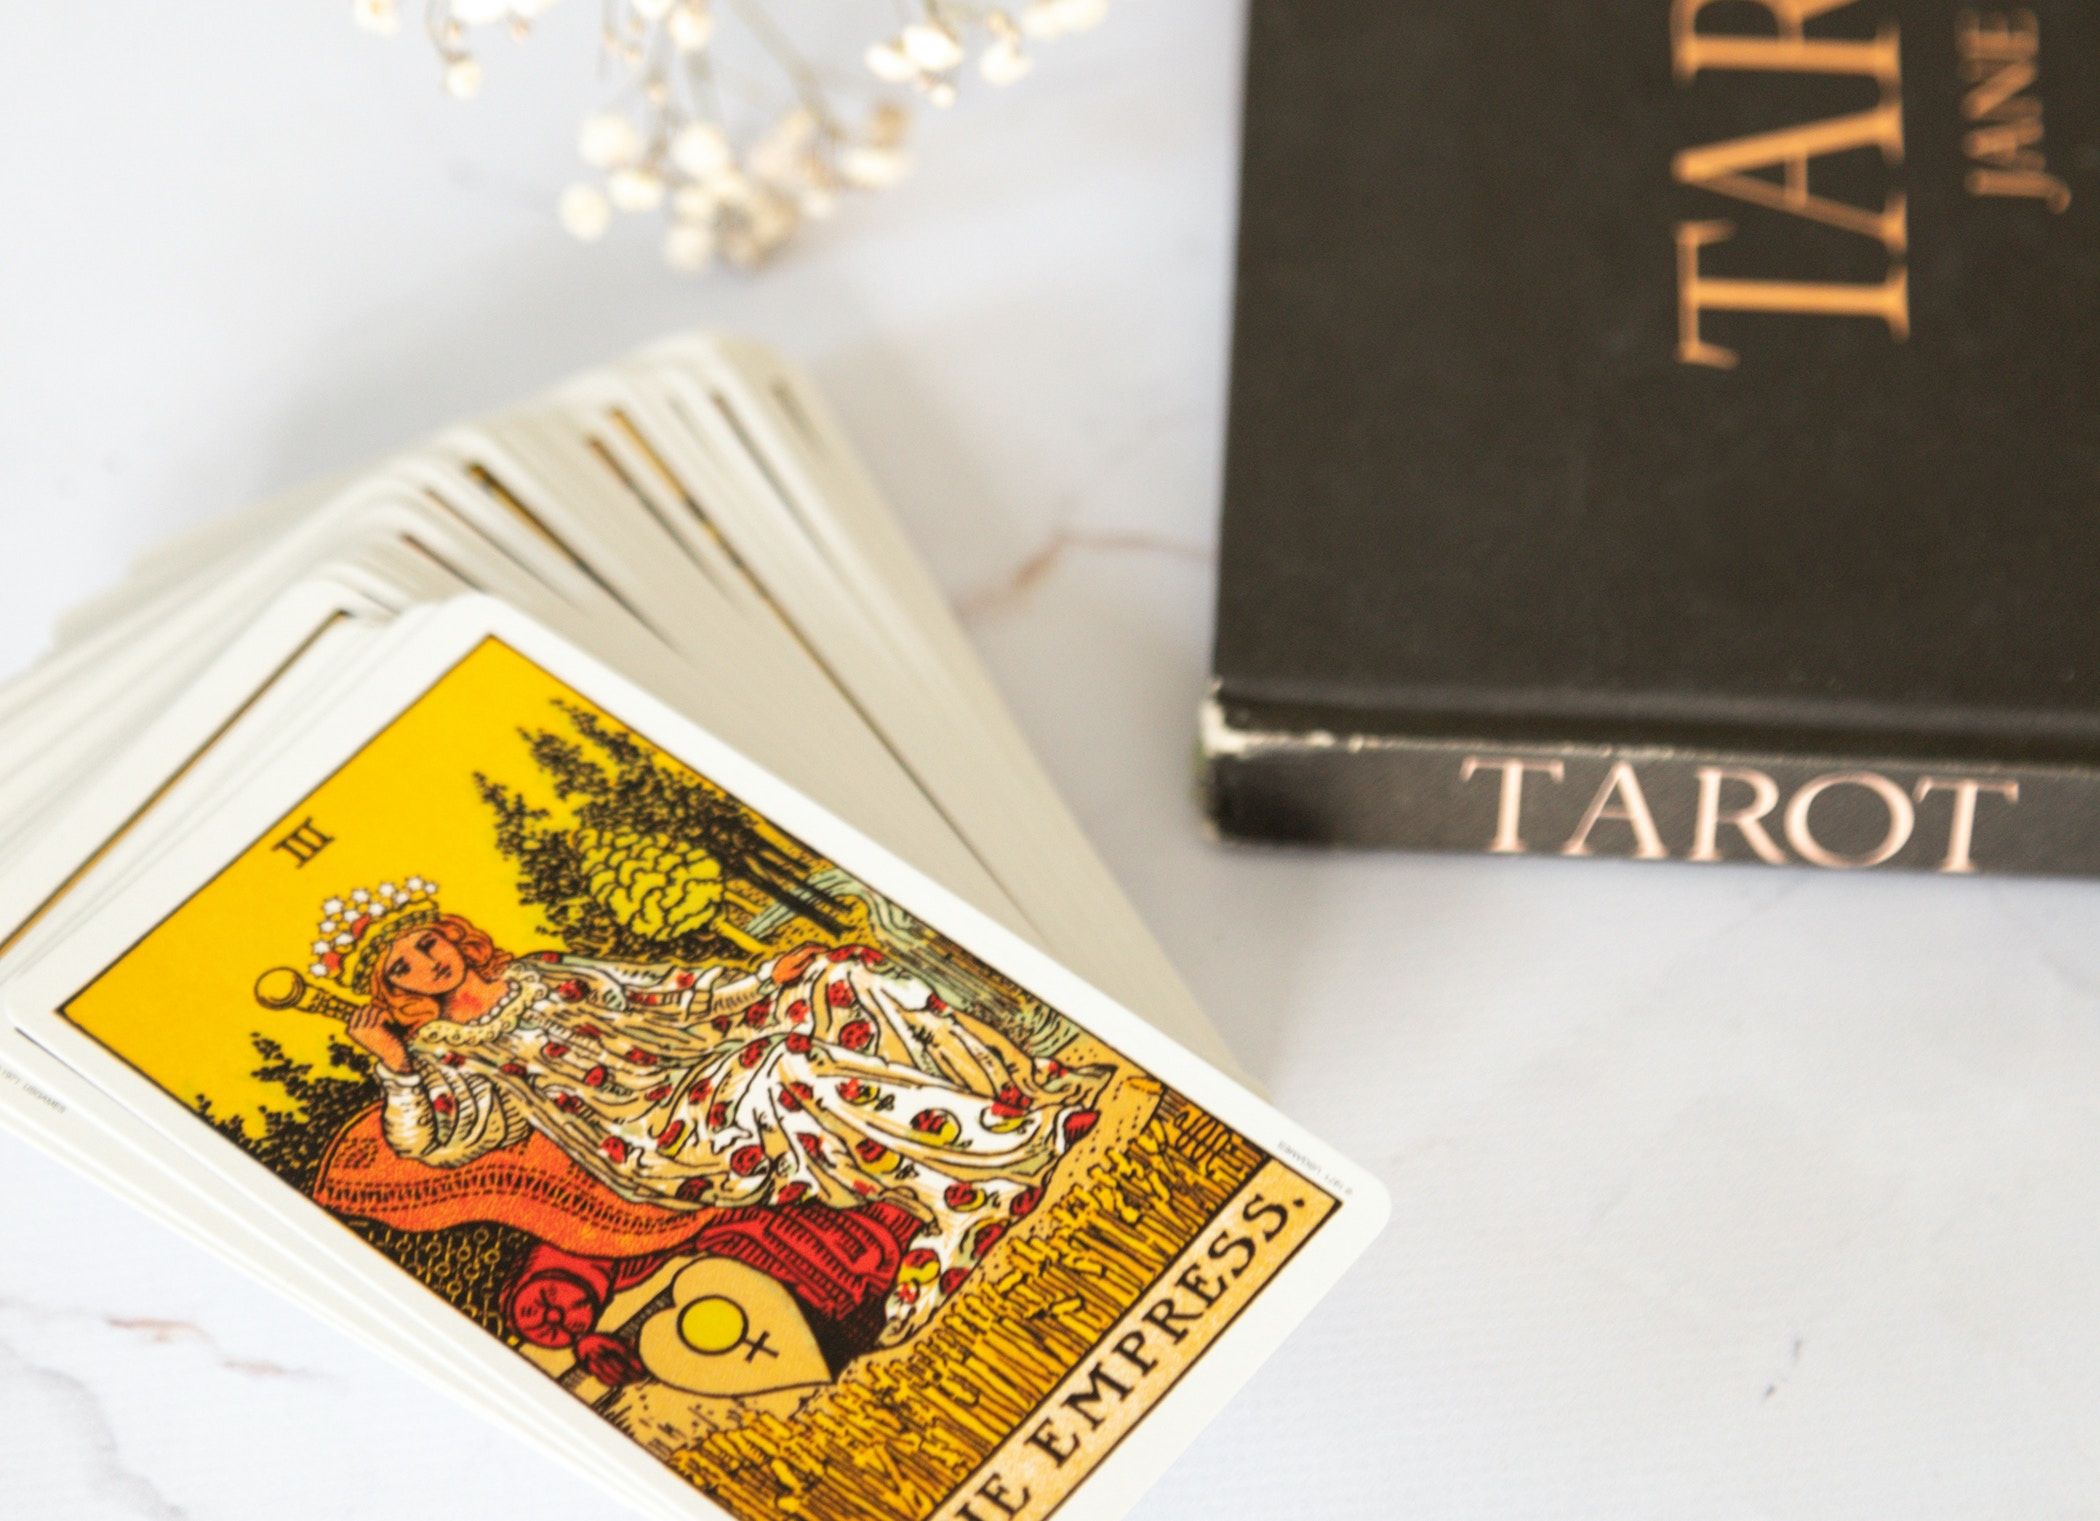 Tarot Card Reading 101 At Home Guide How To Read Tarot Cards 